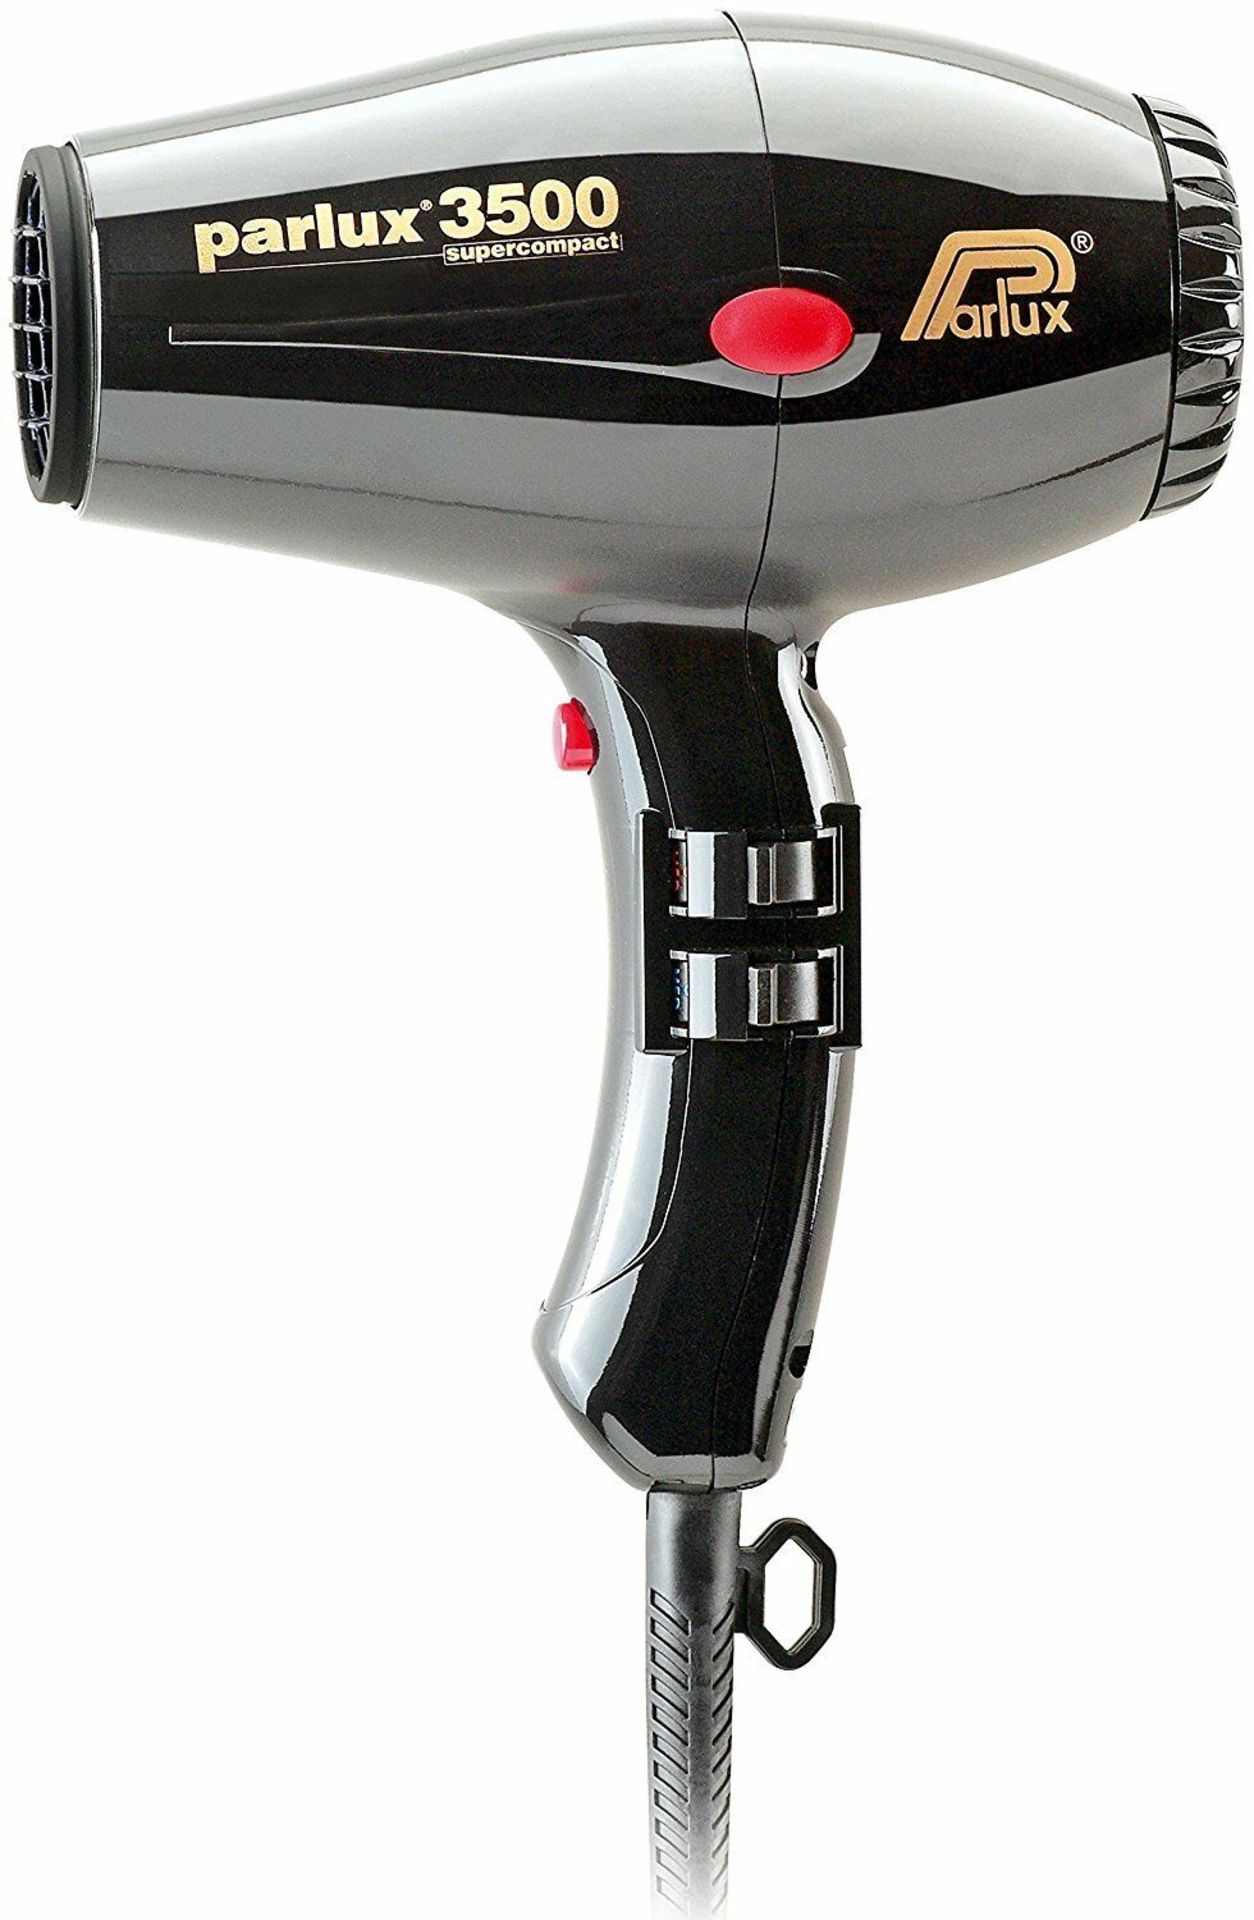 Parlux 3500 Supercompact Hair Dryer Professional Black - Image 3 of 11